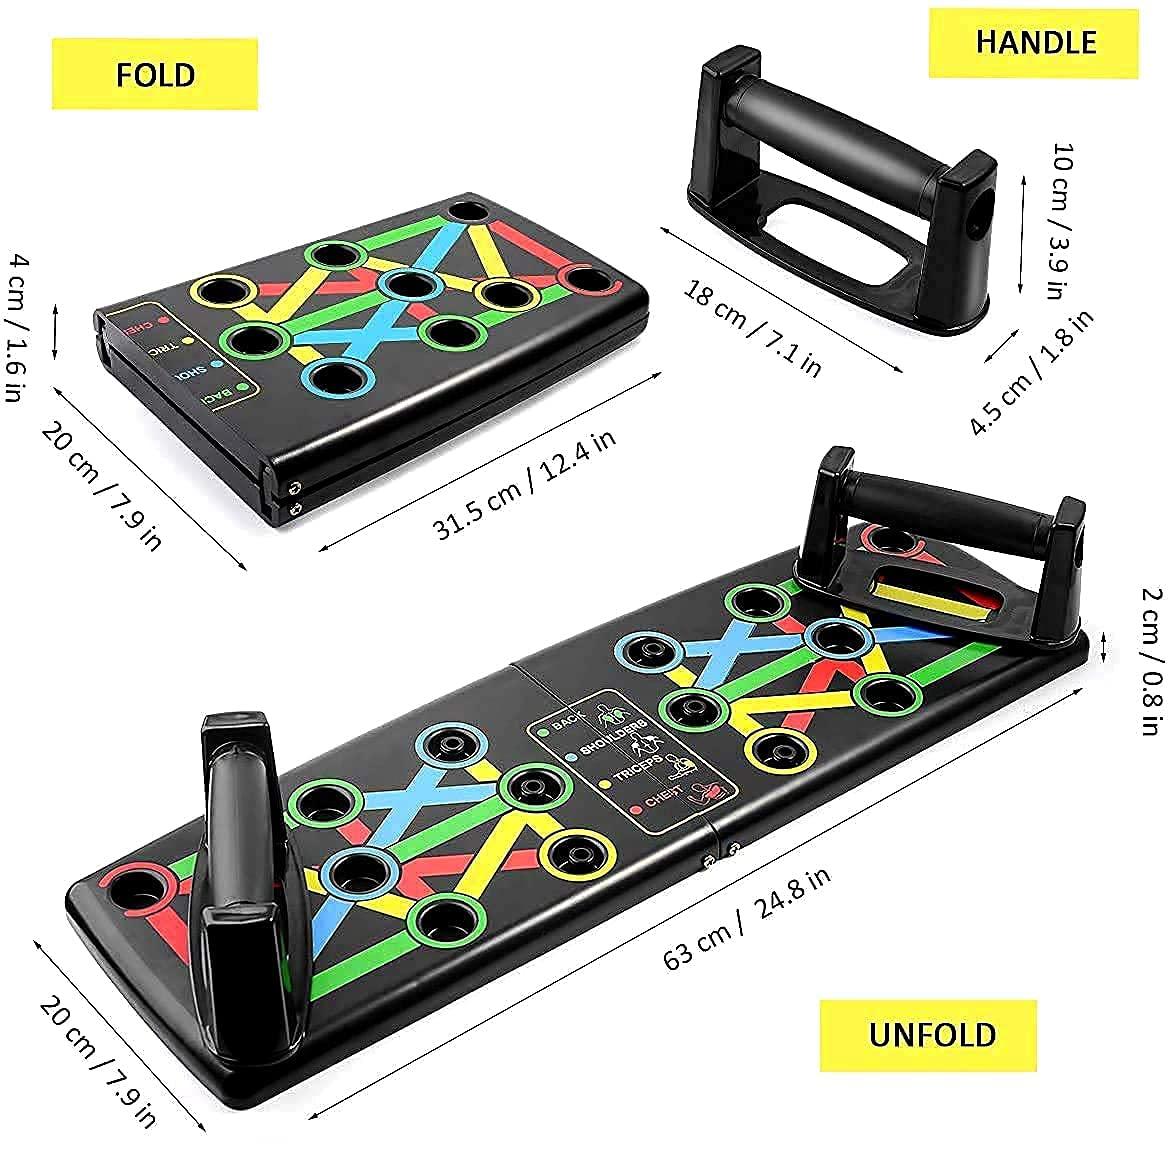 💪 Portable Push Up Board, Body Building Exercise Tools